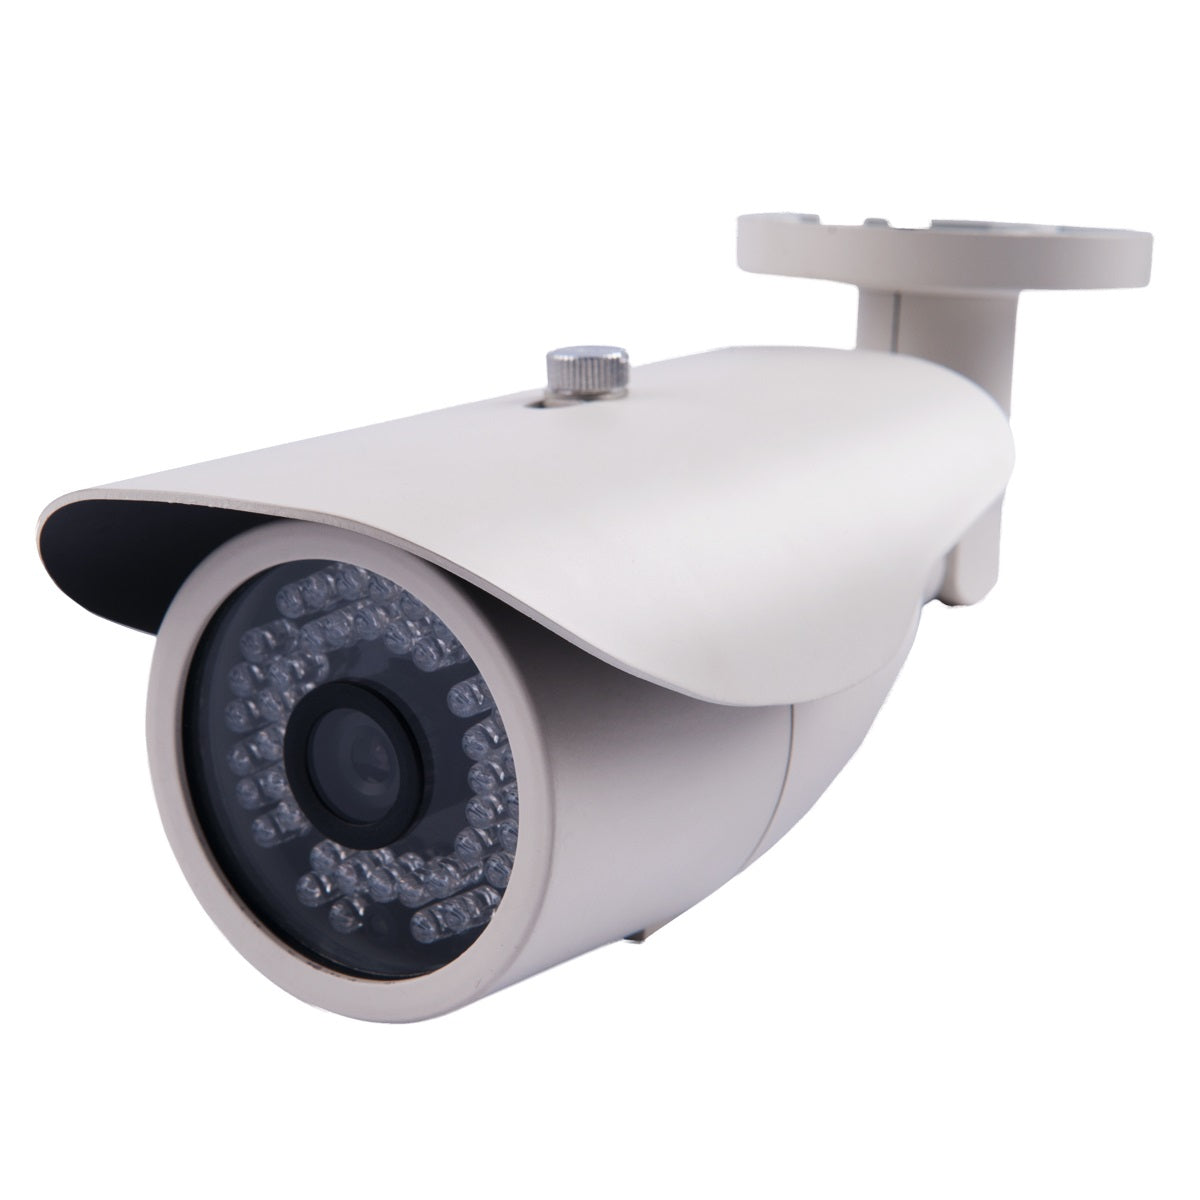 Grandstream GXV3672_FHD Outdoor IP Camera with 3.6mm Lens (GXV3672_FHD) New